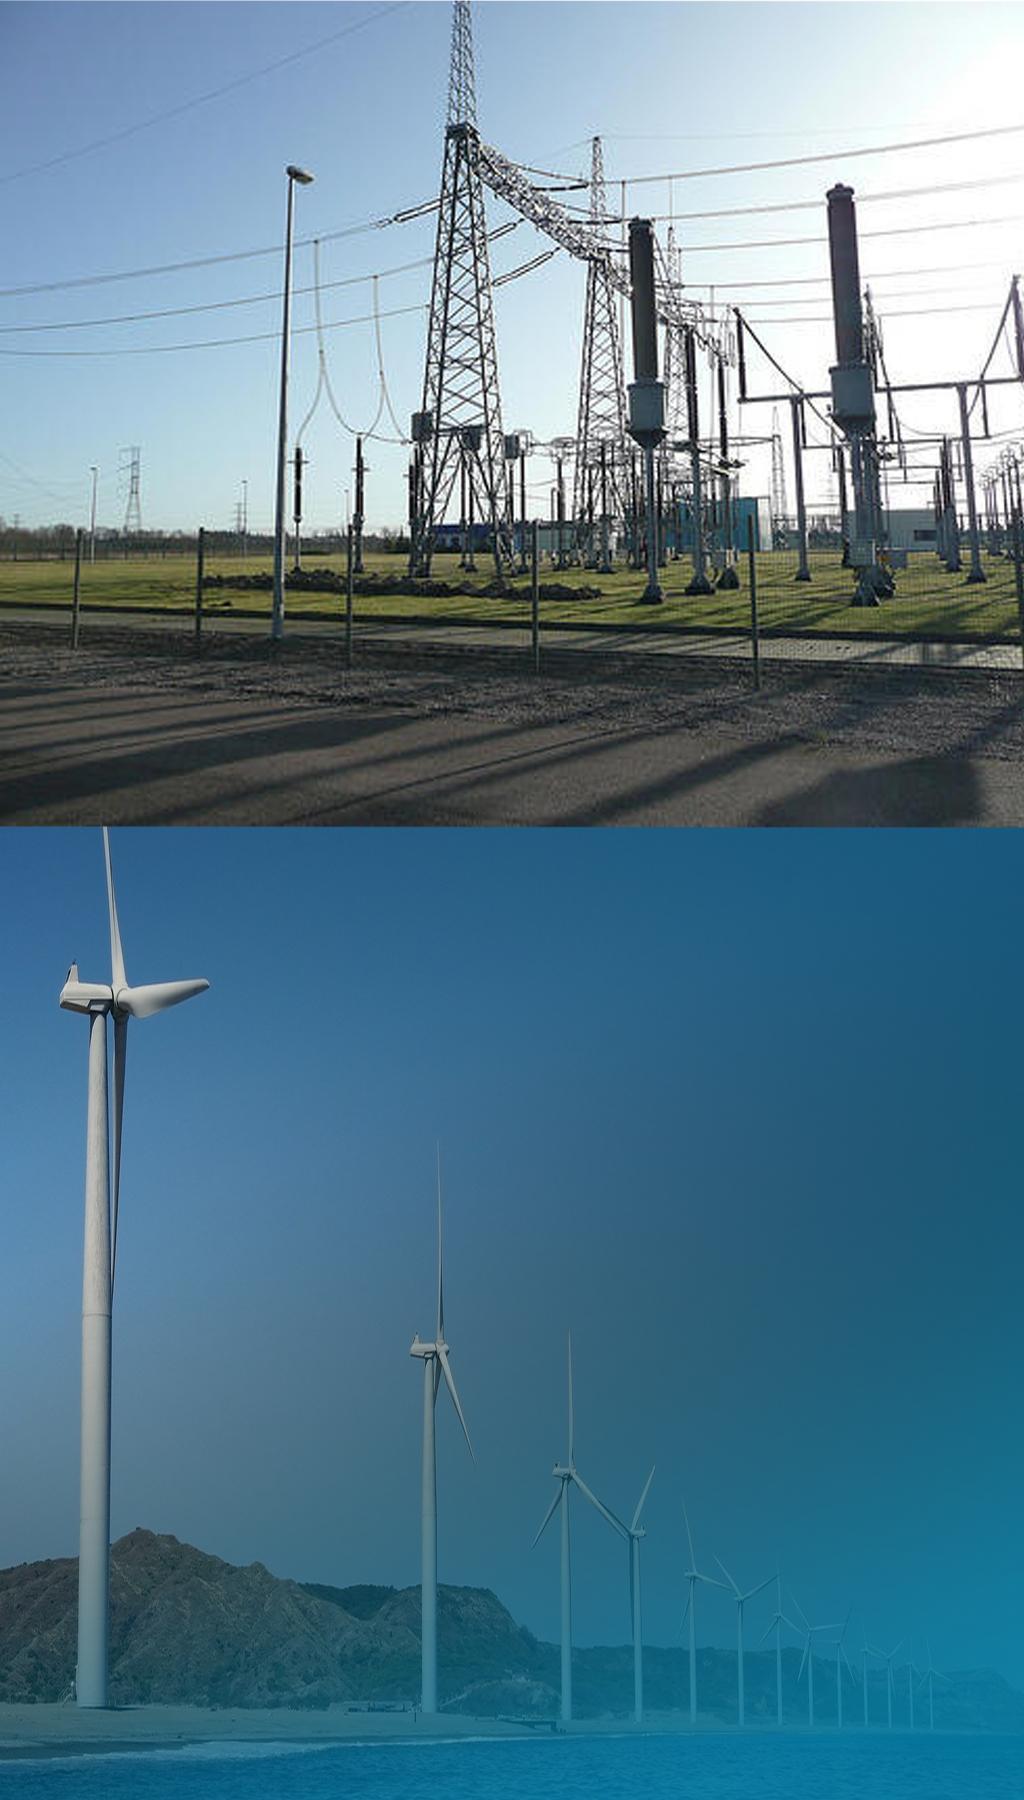 The Energy Division of DCSR Group implements Distribution System / Switchyards and Sub stations for power utilities from 11 kv to 400 kv.